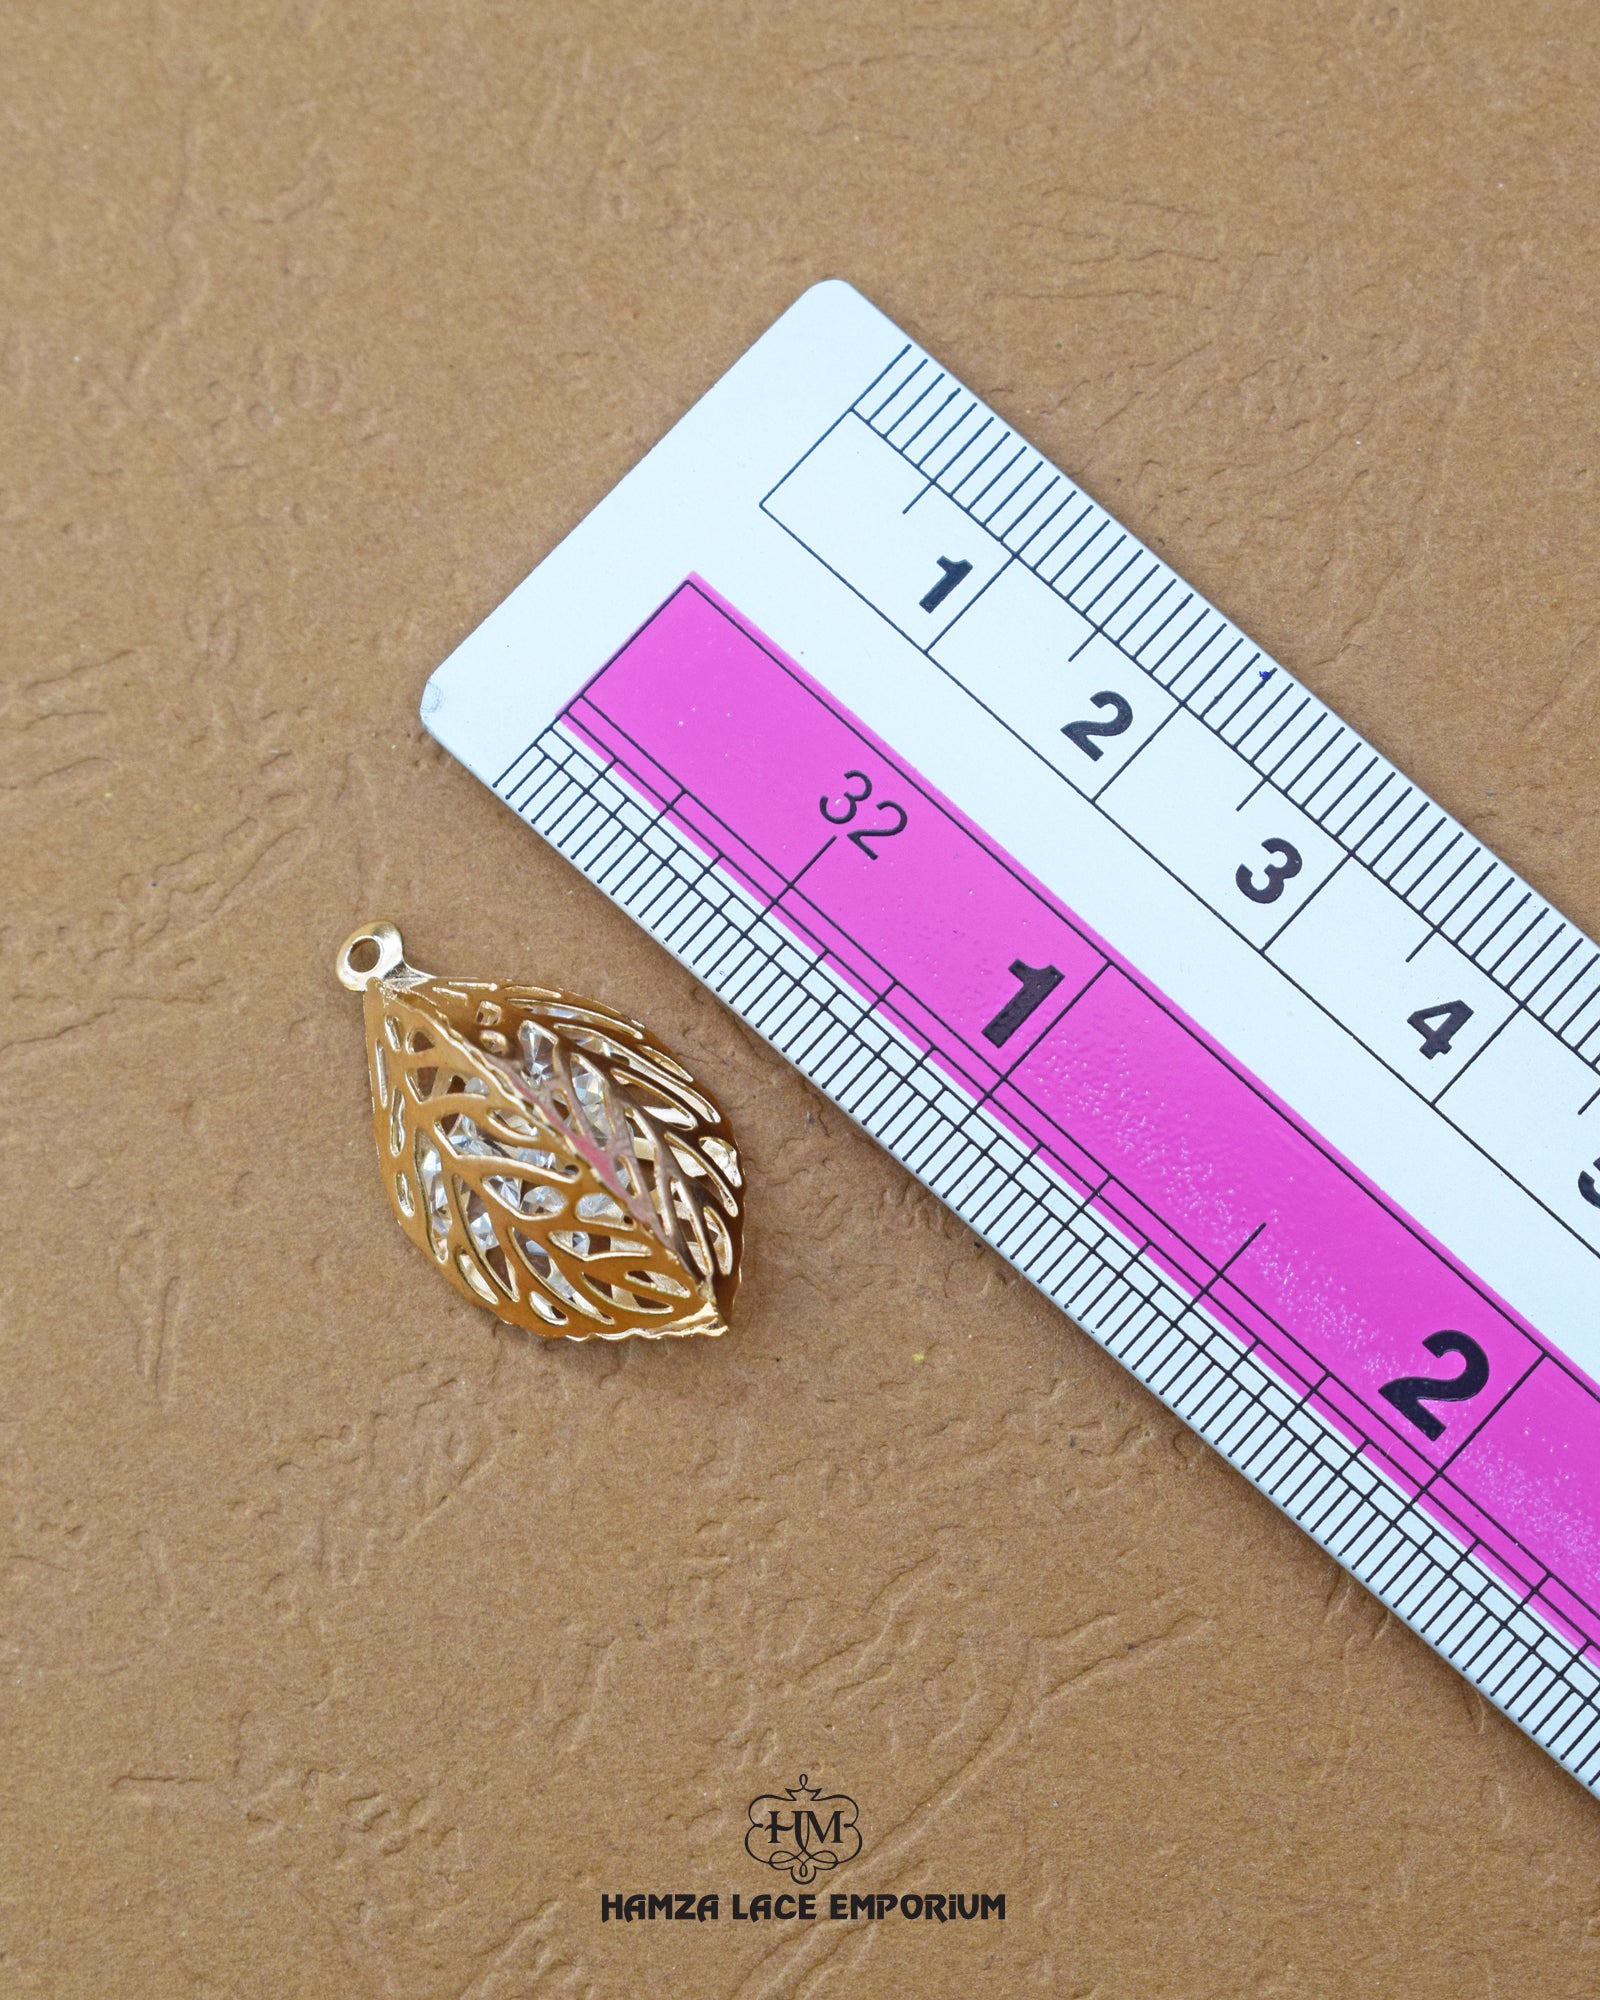 The size of the 'Leaf Design Metal Accessory MA256' is indicated using a ruler.